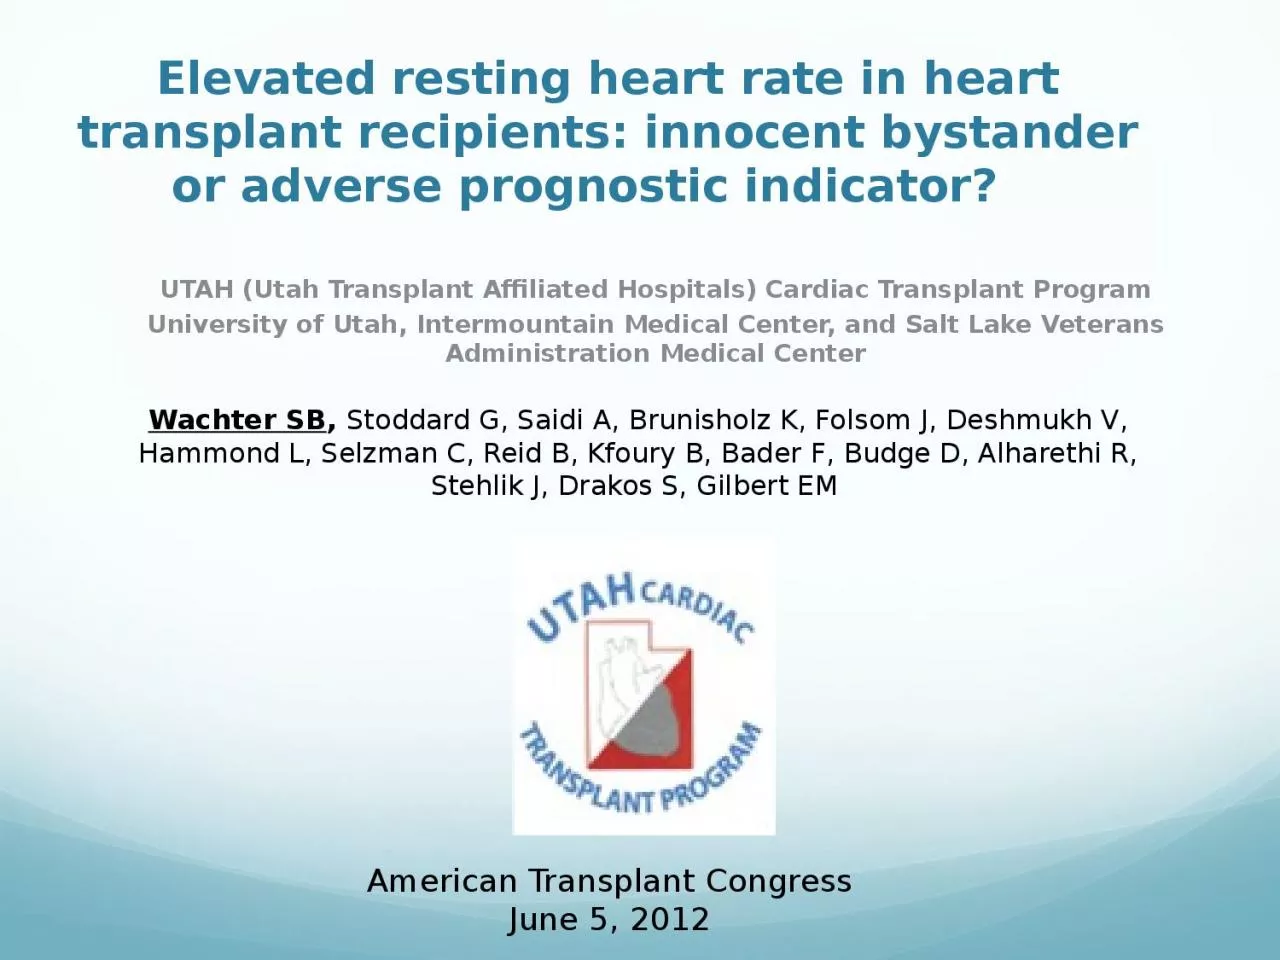 Elevated resting heart rate in heart transplant recipients: innocent bystander or adverse